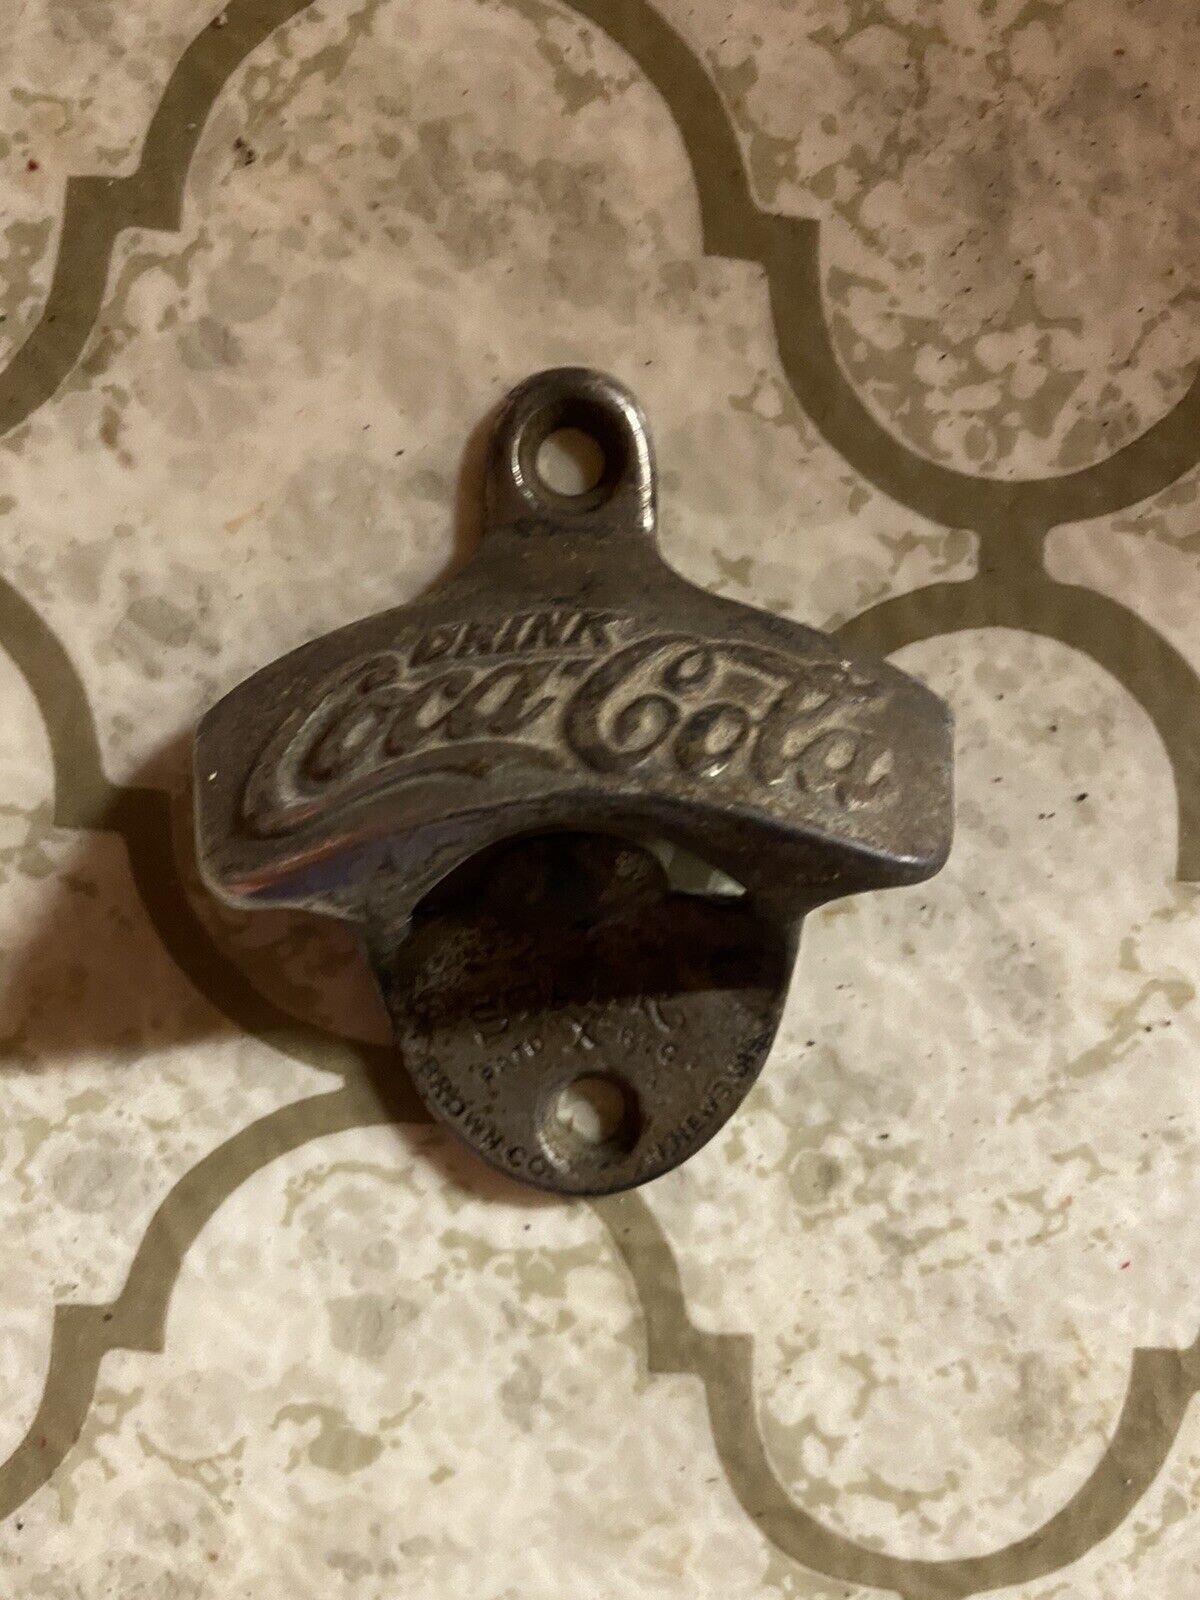 Antique Coca Cola Wall Mount Bottle Opener STARR X Brown Co PATD REG 1924 Md USA